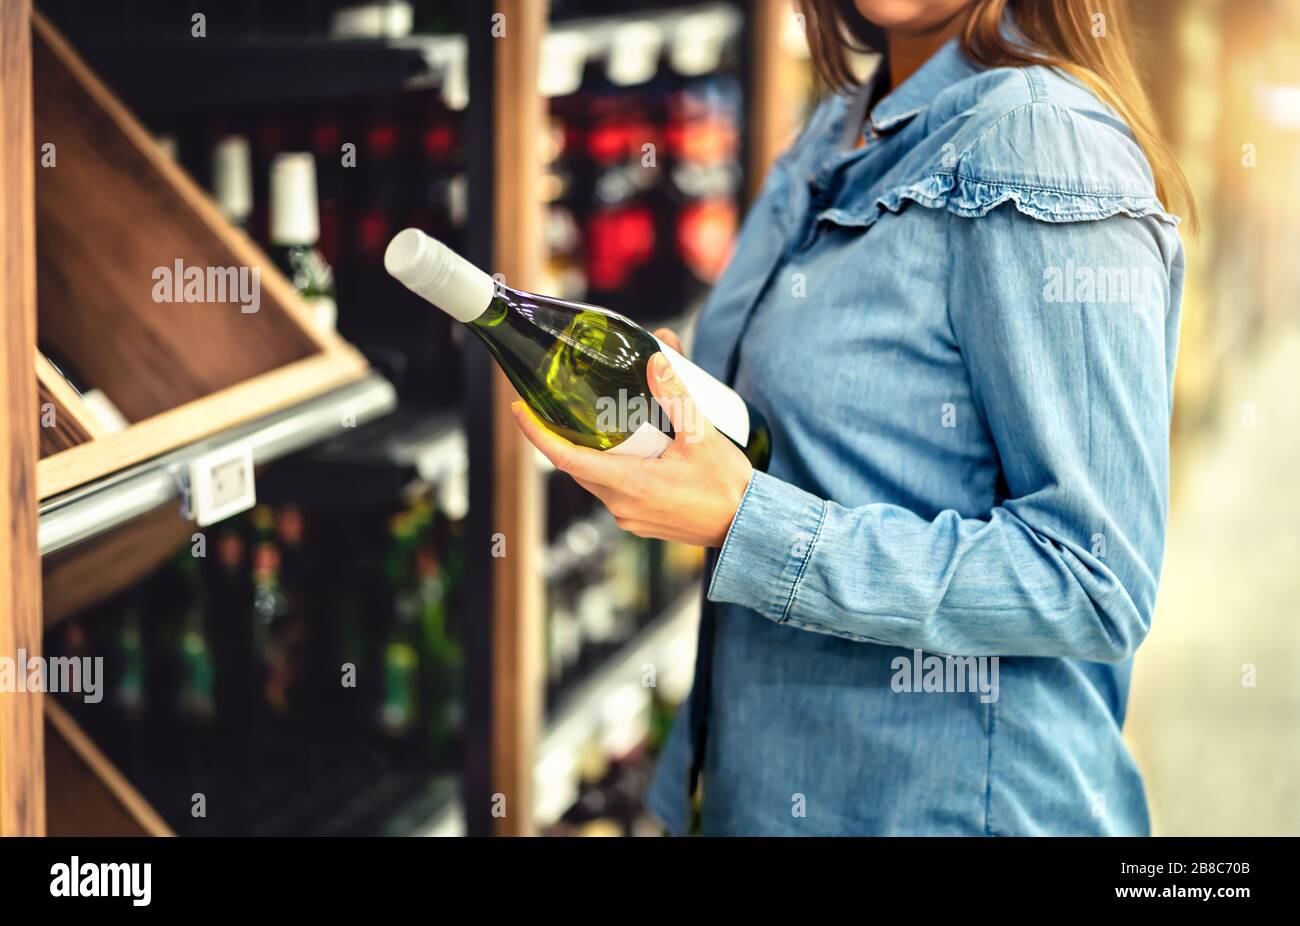 Customer buying white wine or sparkling drink. Alcohol aisle in store or supermarket. Woman holding bottle. Buying riesling or chardonnay. Stock Photo